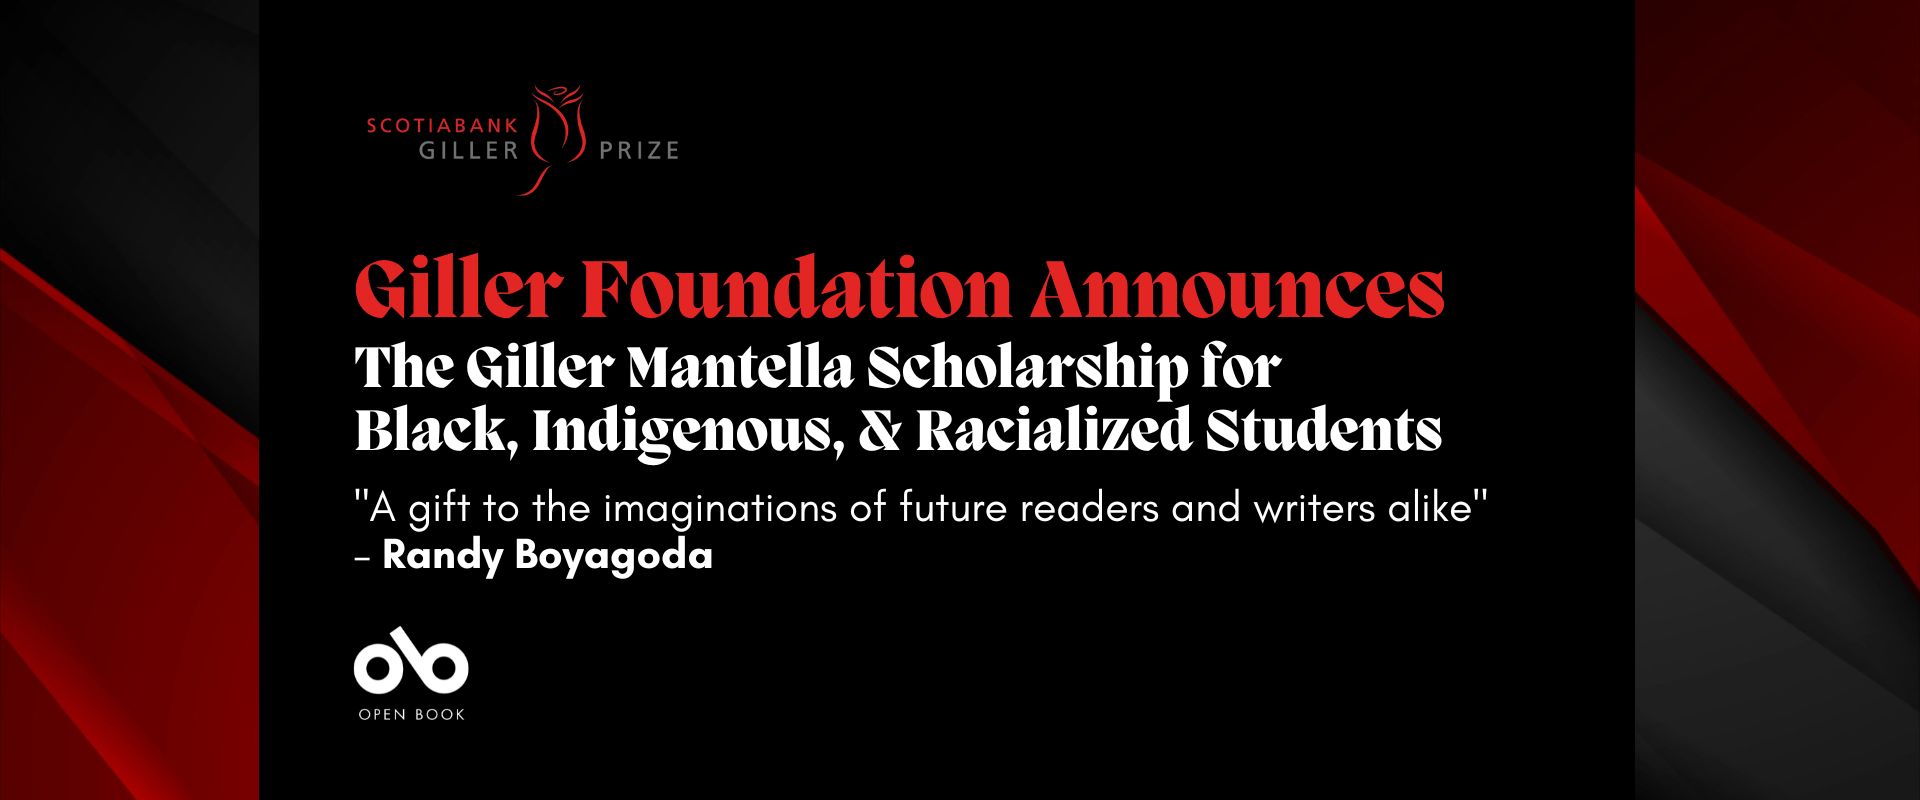 black and red banner with text reading "Giller Foundation Announces The Giller Mantella Scholarship for Black, Indigenous, and Racialized Students" and "A gift to the imaginations of future readers and writers alike – Randy Boyagoda". Giller Prize logo top left, Open Book logo bottom left